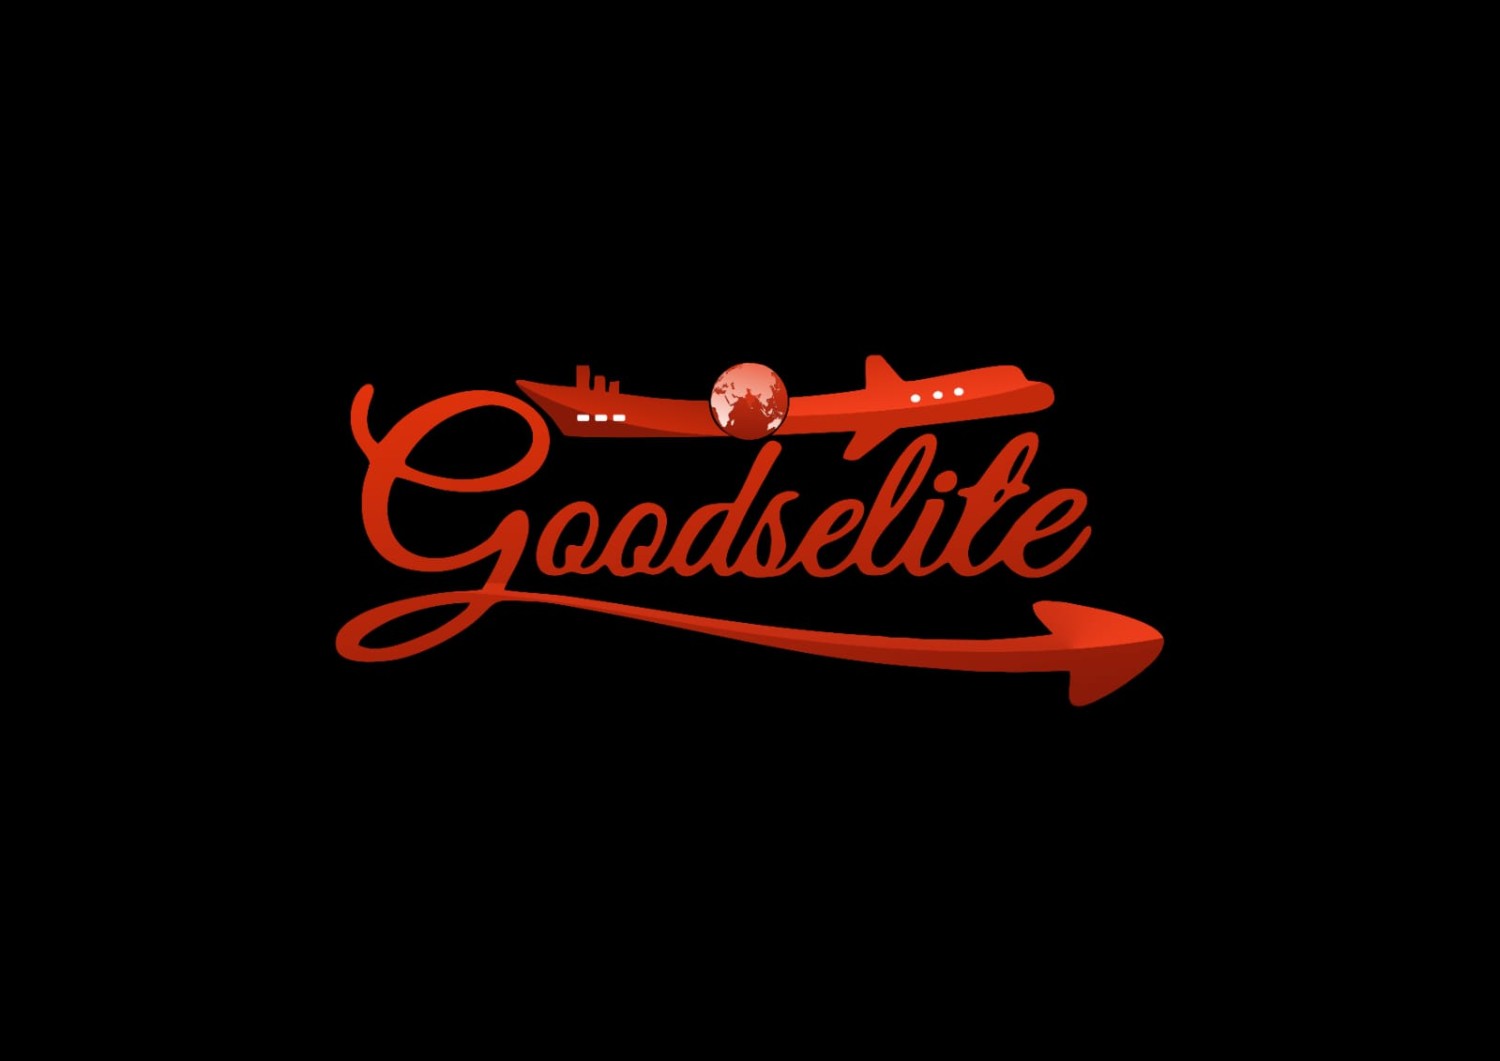 GOODSELITE EXPORTS AND IMPORTS